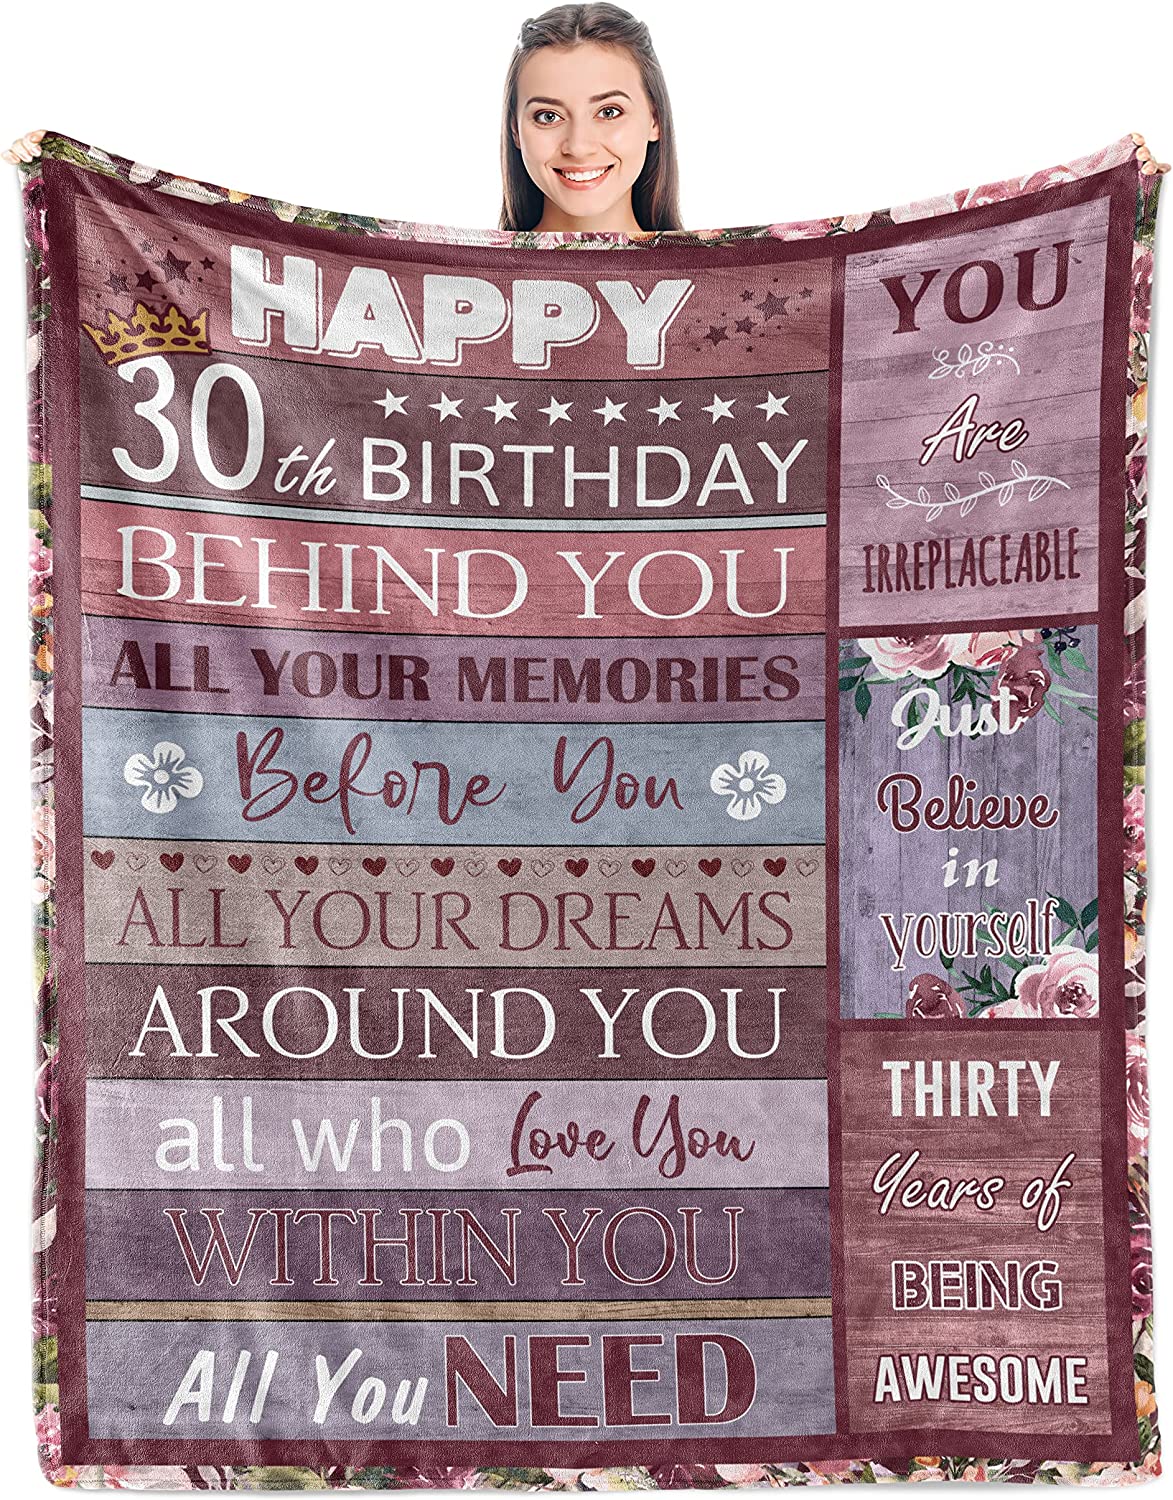 Best 30th Birthday Gifts for Her - Happy 30th Birthday Gifts for Women -  Gifts for 30th Birthday Woman - Birthday Gift Ideas for Women 30th - 30th  Birthday Decorations for Women